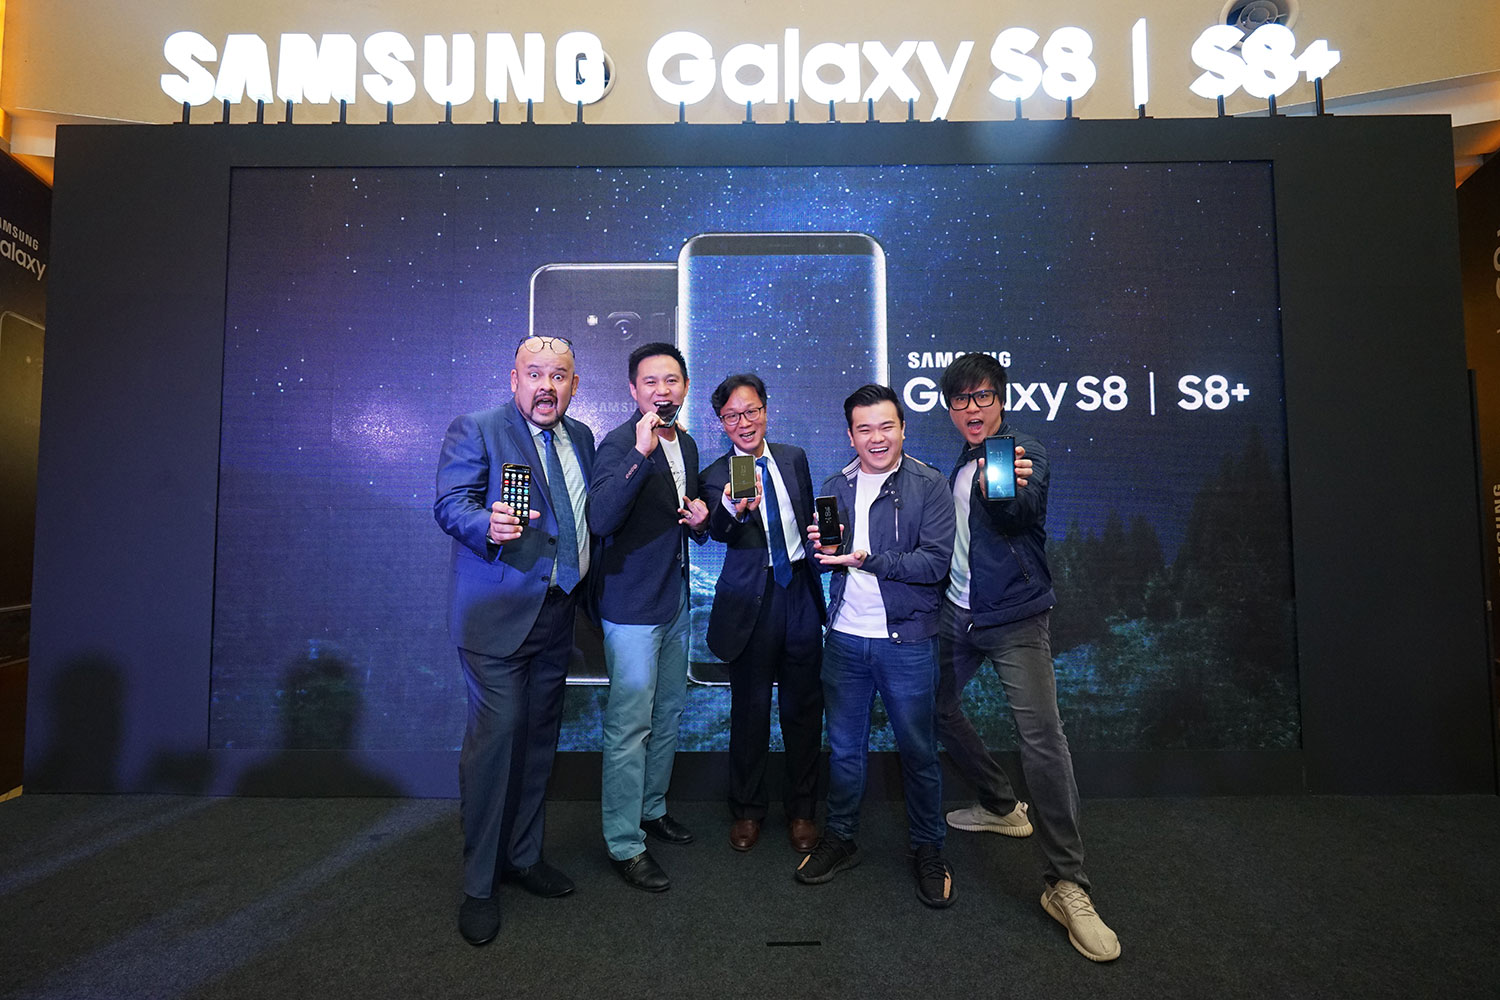 Samsung Galaxy S8 and S8+ Officially Launched in Malaysia